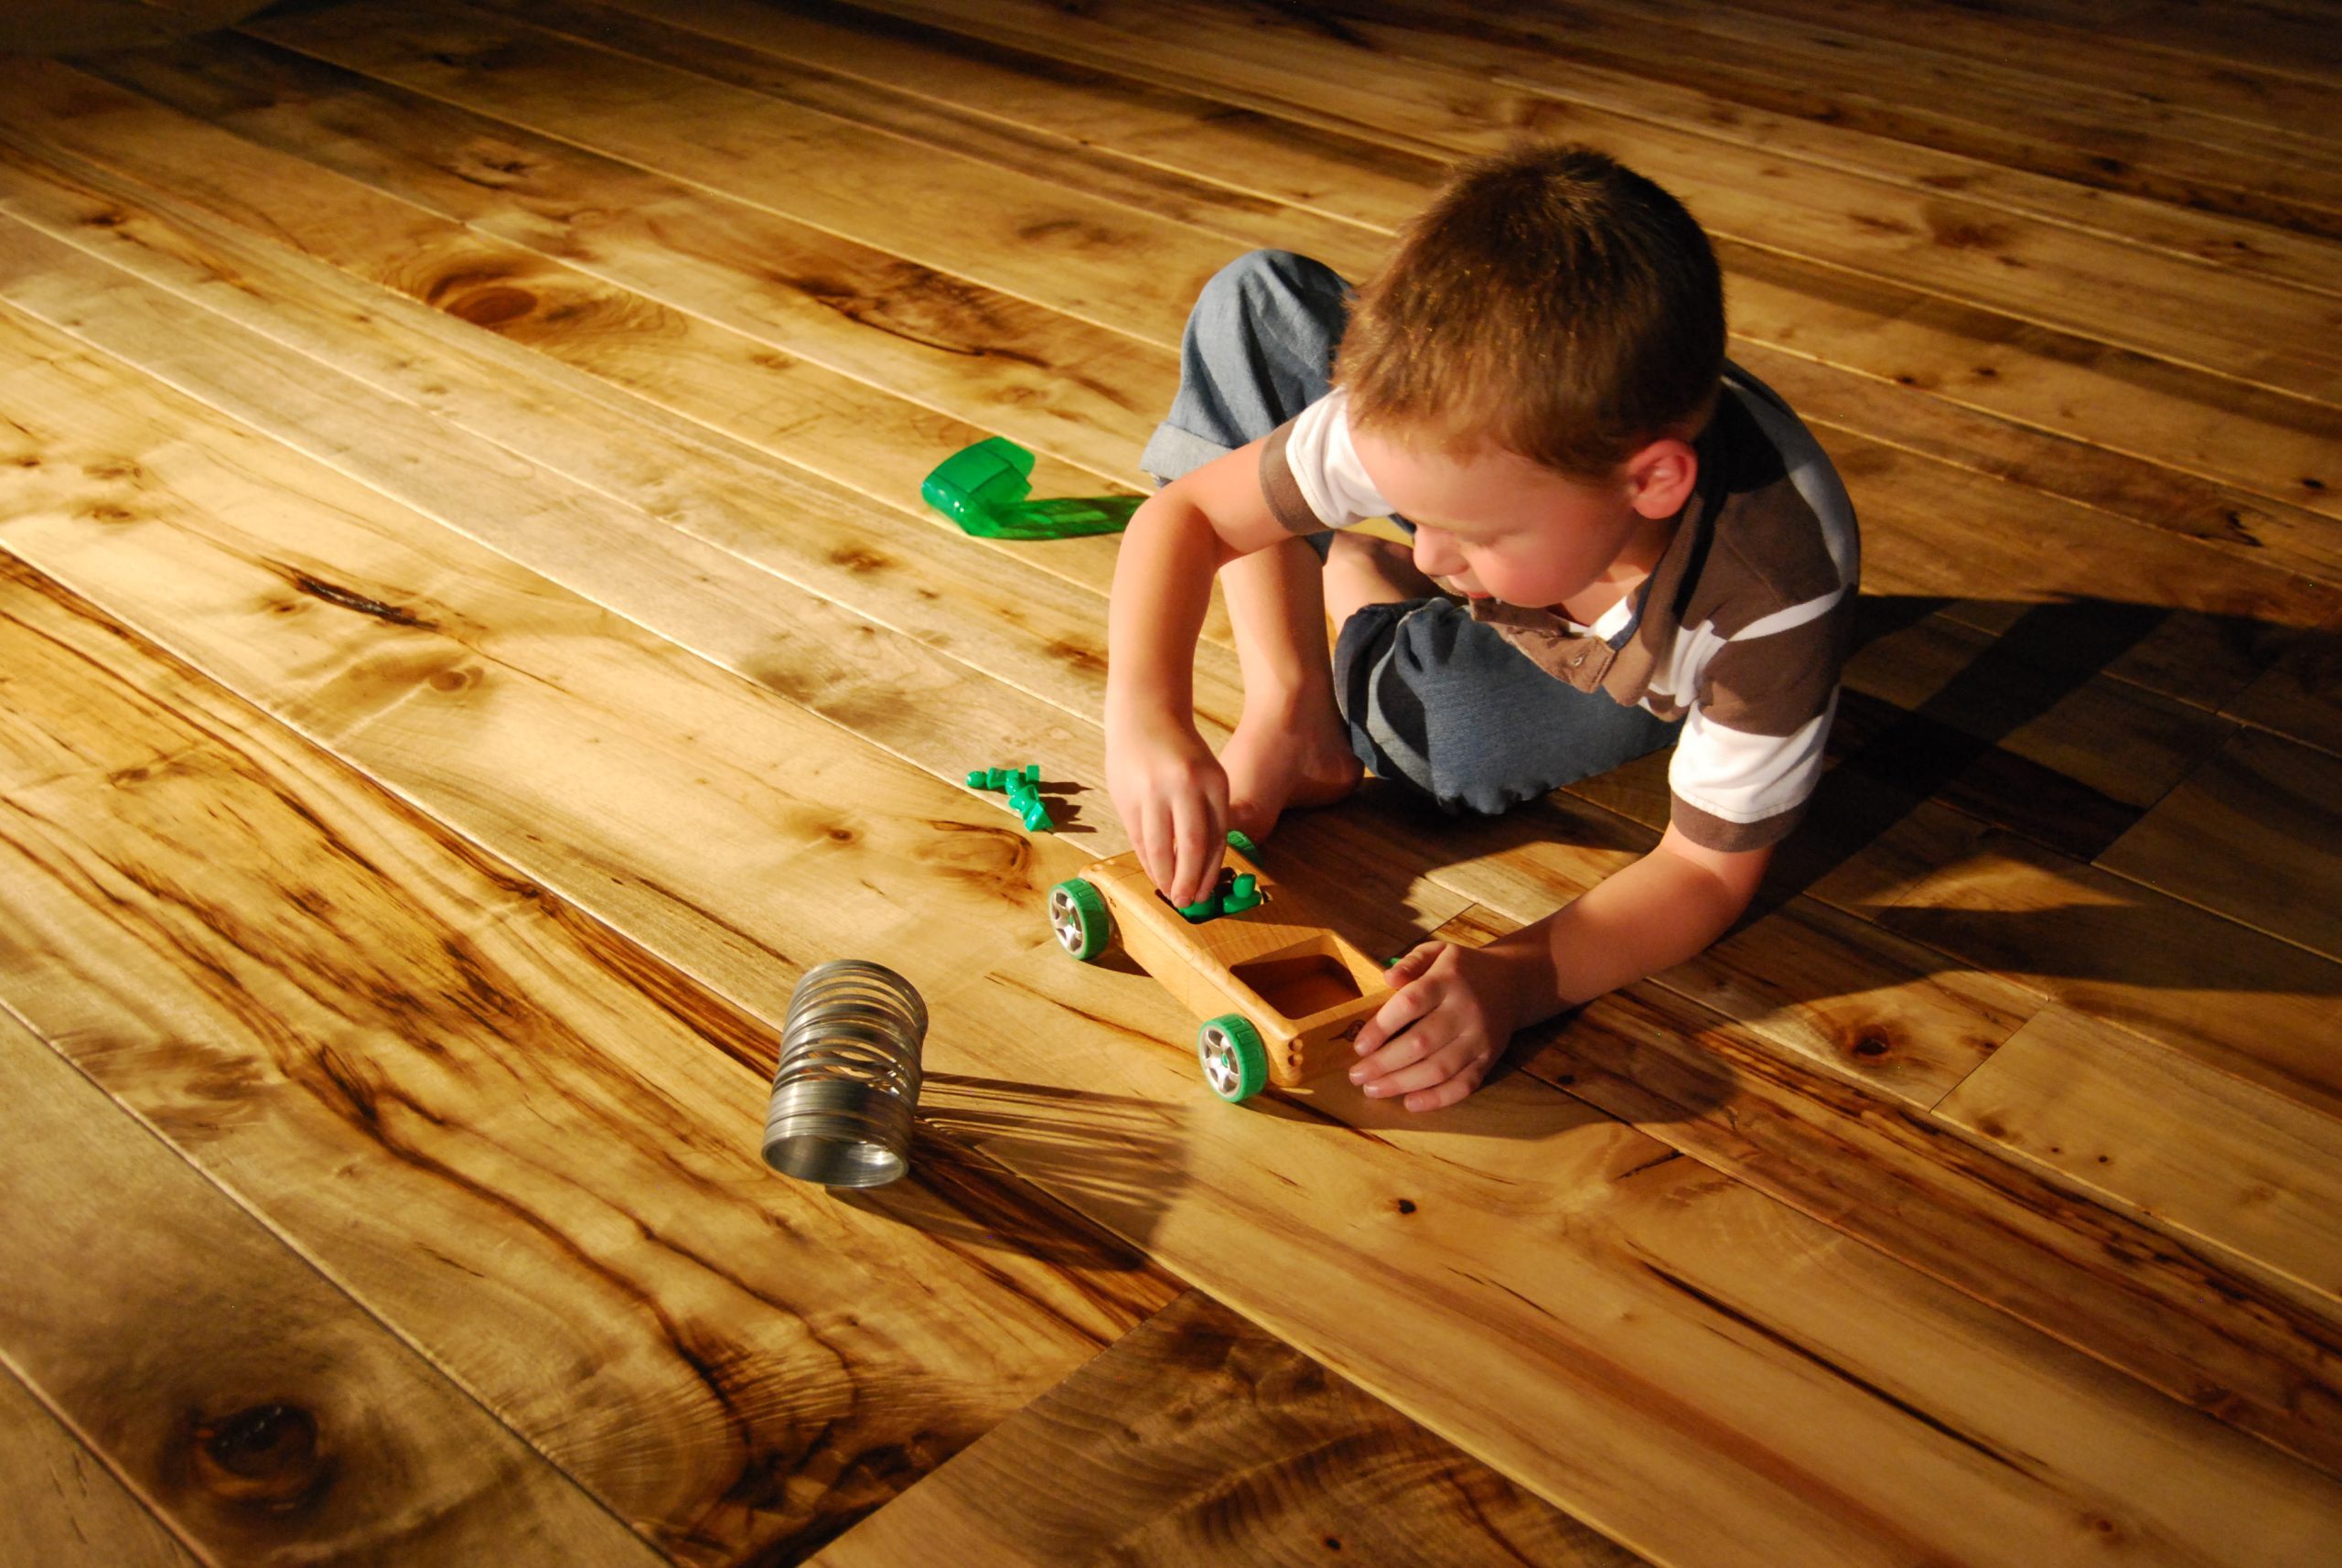 Flooring Options For Families With Kids|kids-playing-on-the-wooden-floor